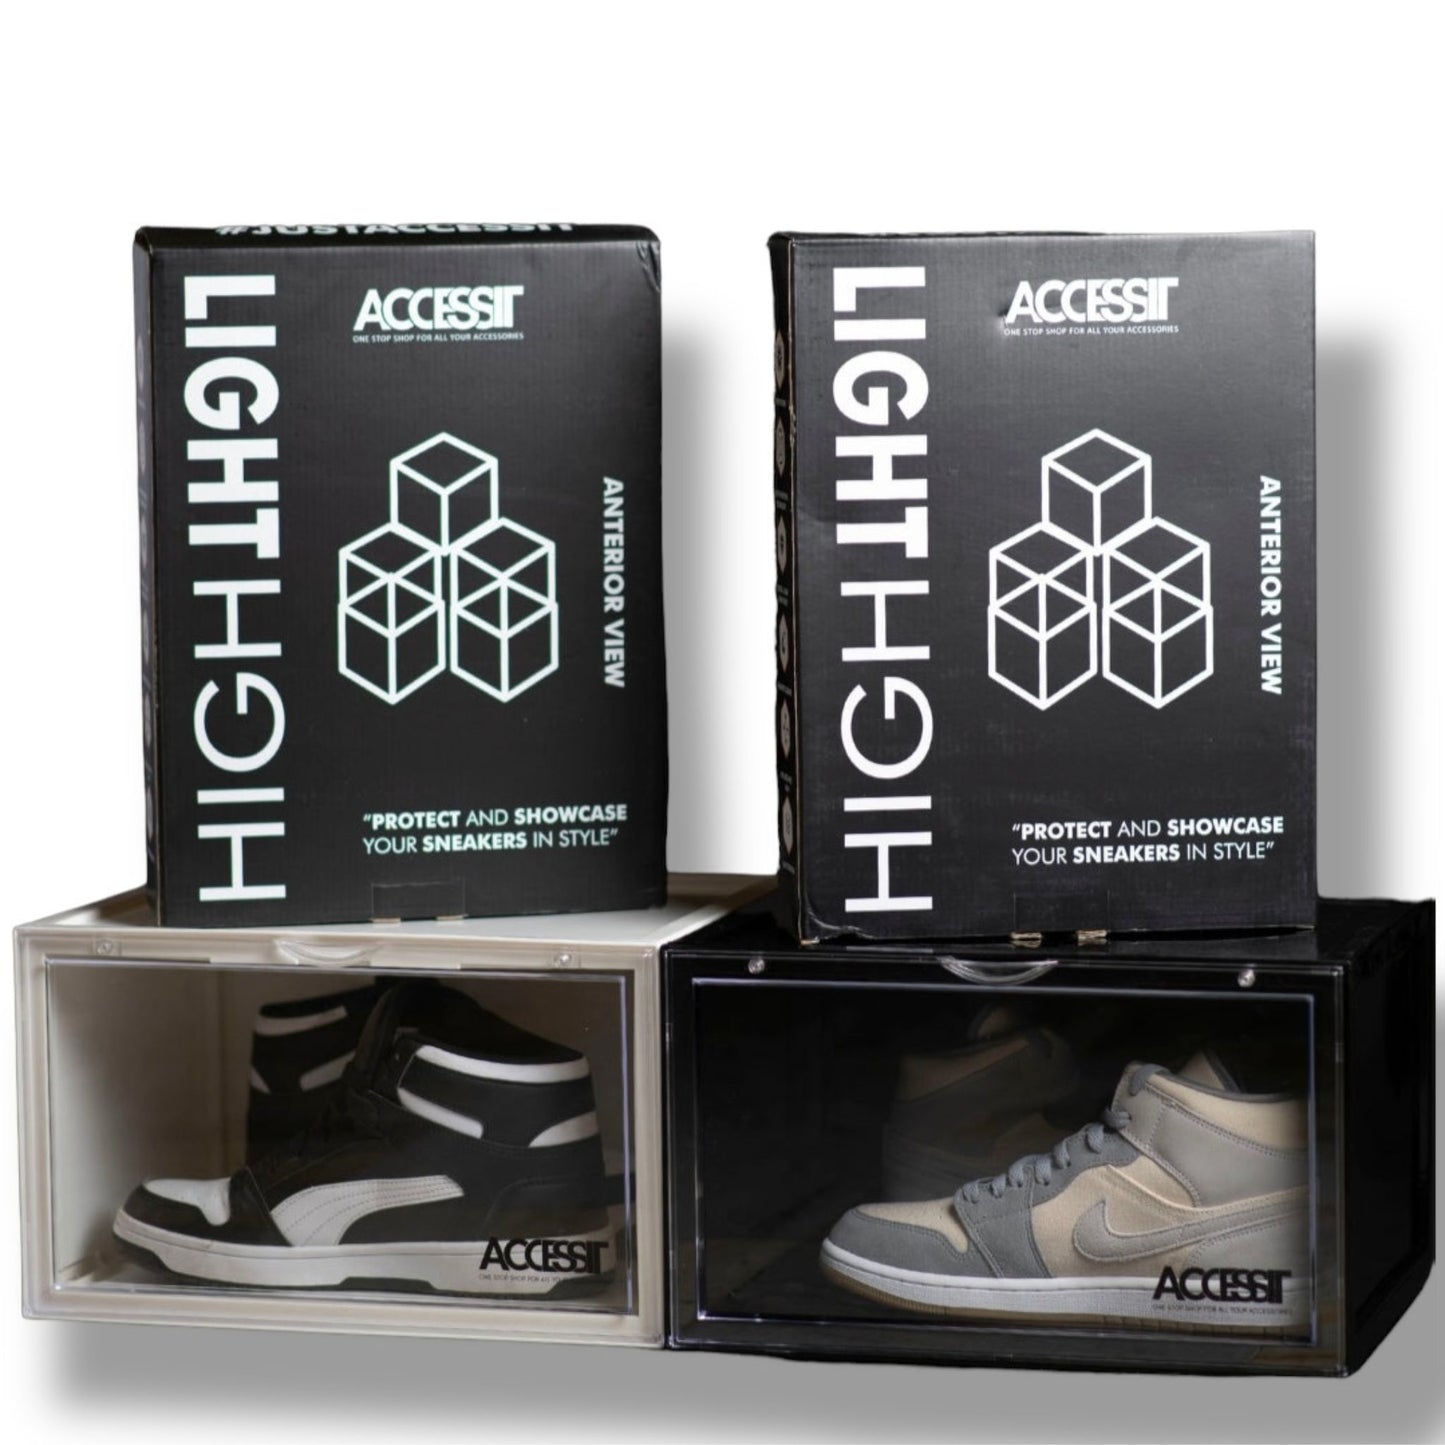 Highlight Sneaker Crates | Shoe Storage View) – accessitshop